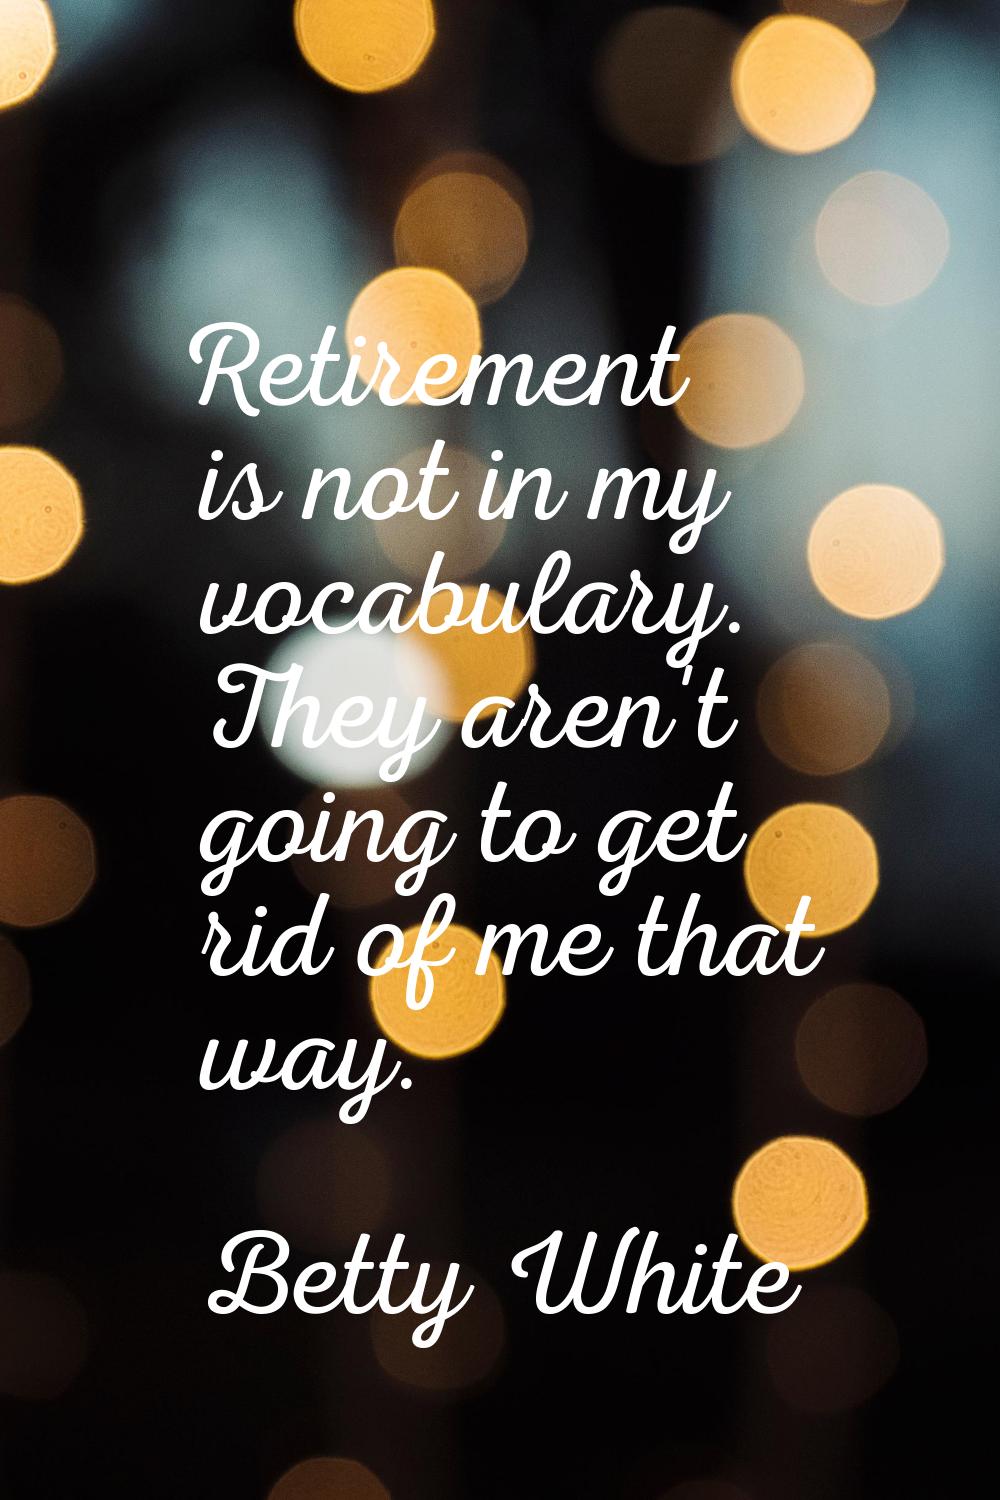 Retirement is not in my vocabulary. They aren't going to get rid of me that way.